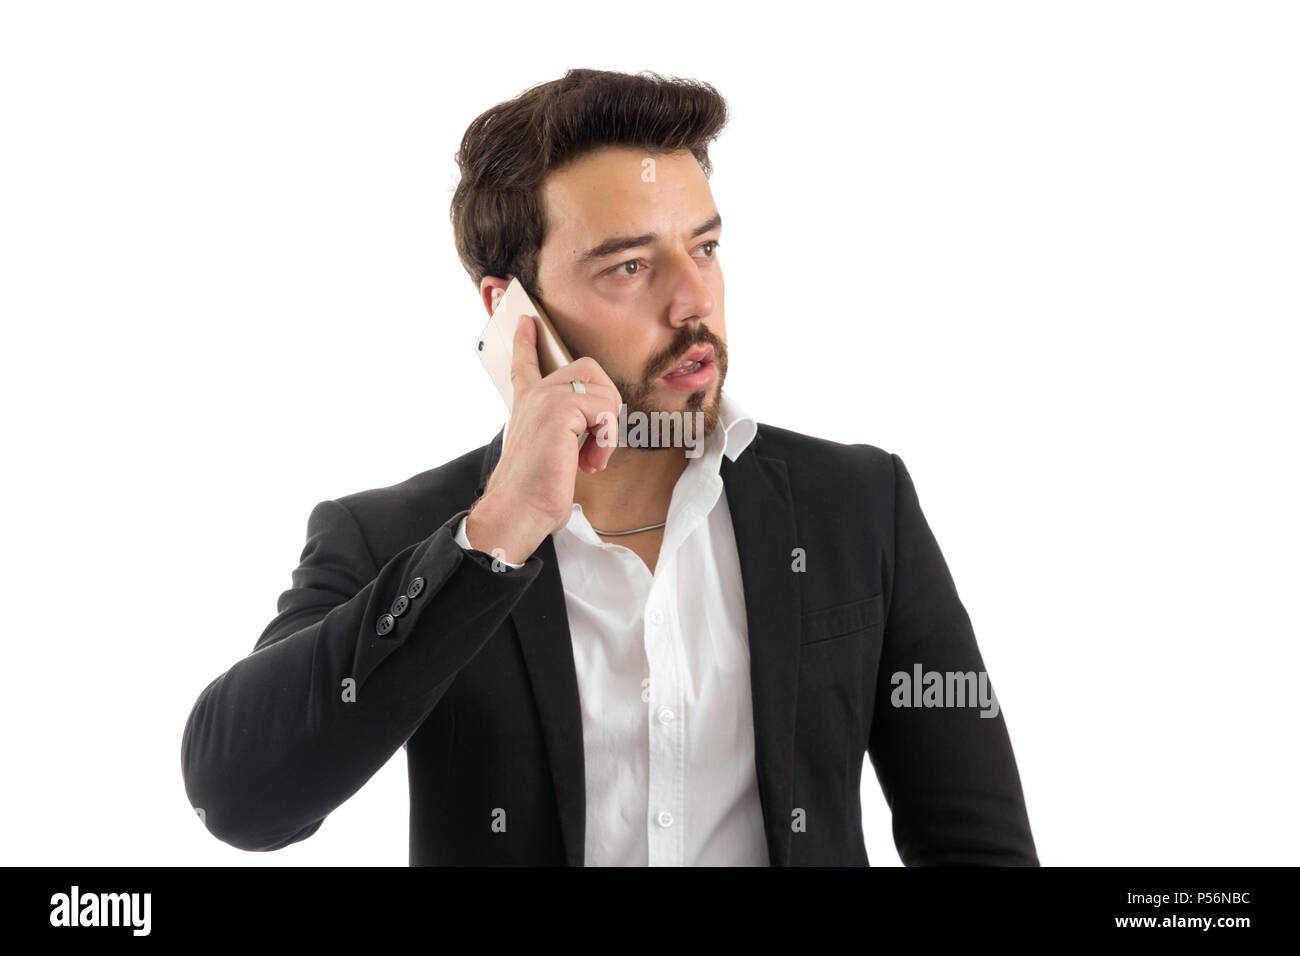 Businessman is looking to the side. He's talking on the phone. Concept of communication, telephony. Beautiful bearded person is wearing black jacket a Stock Photo